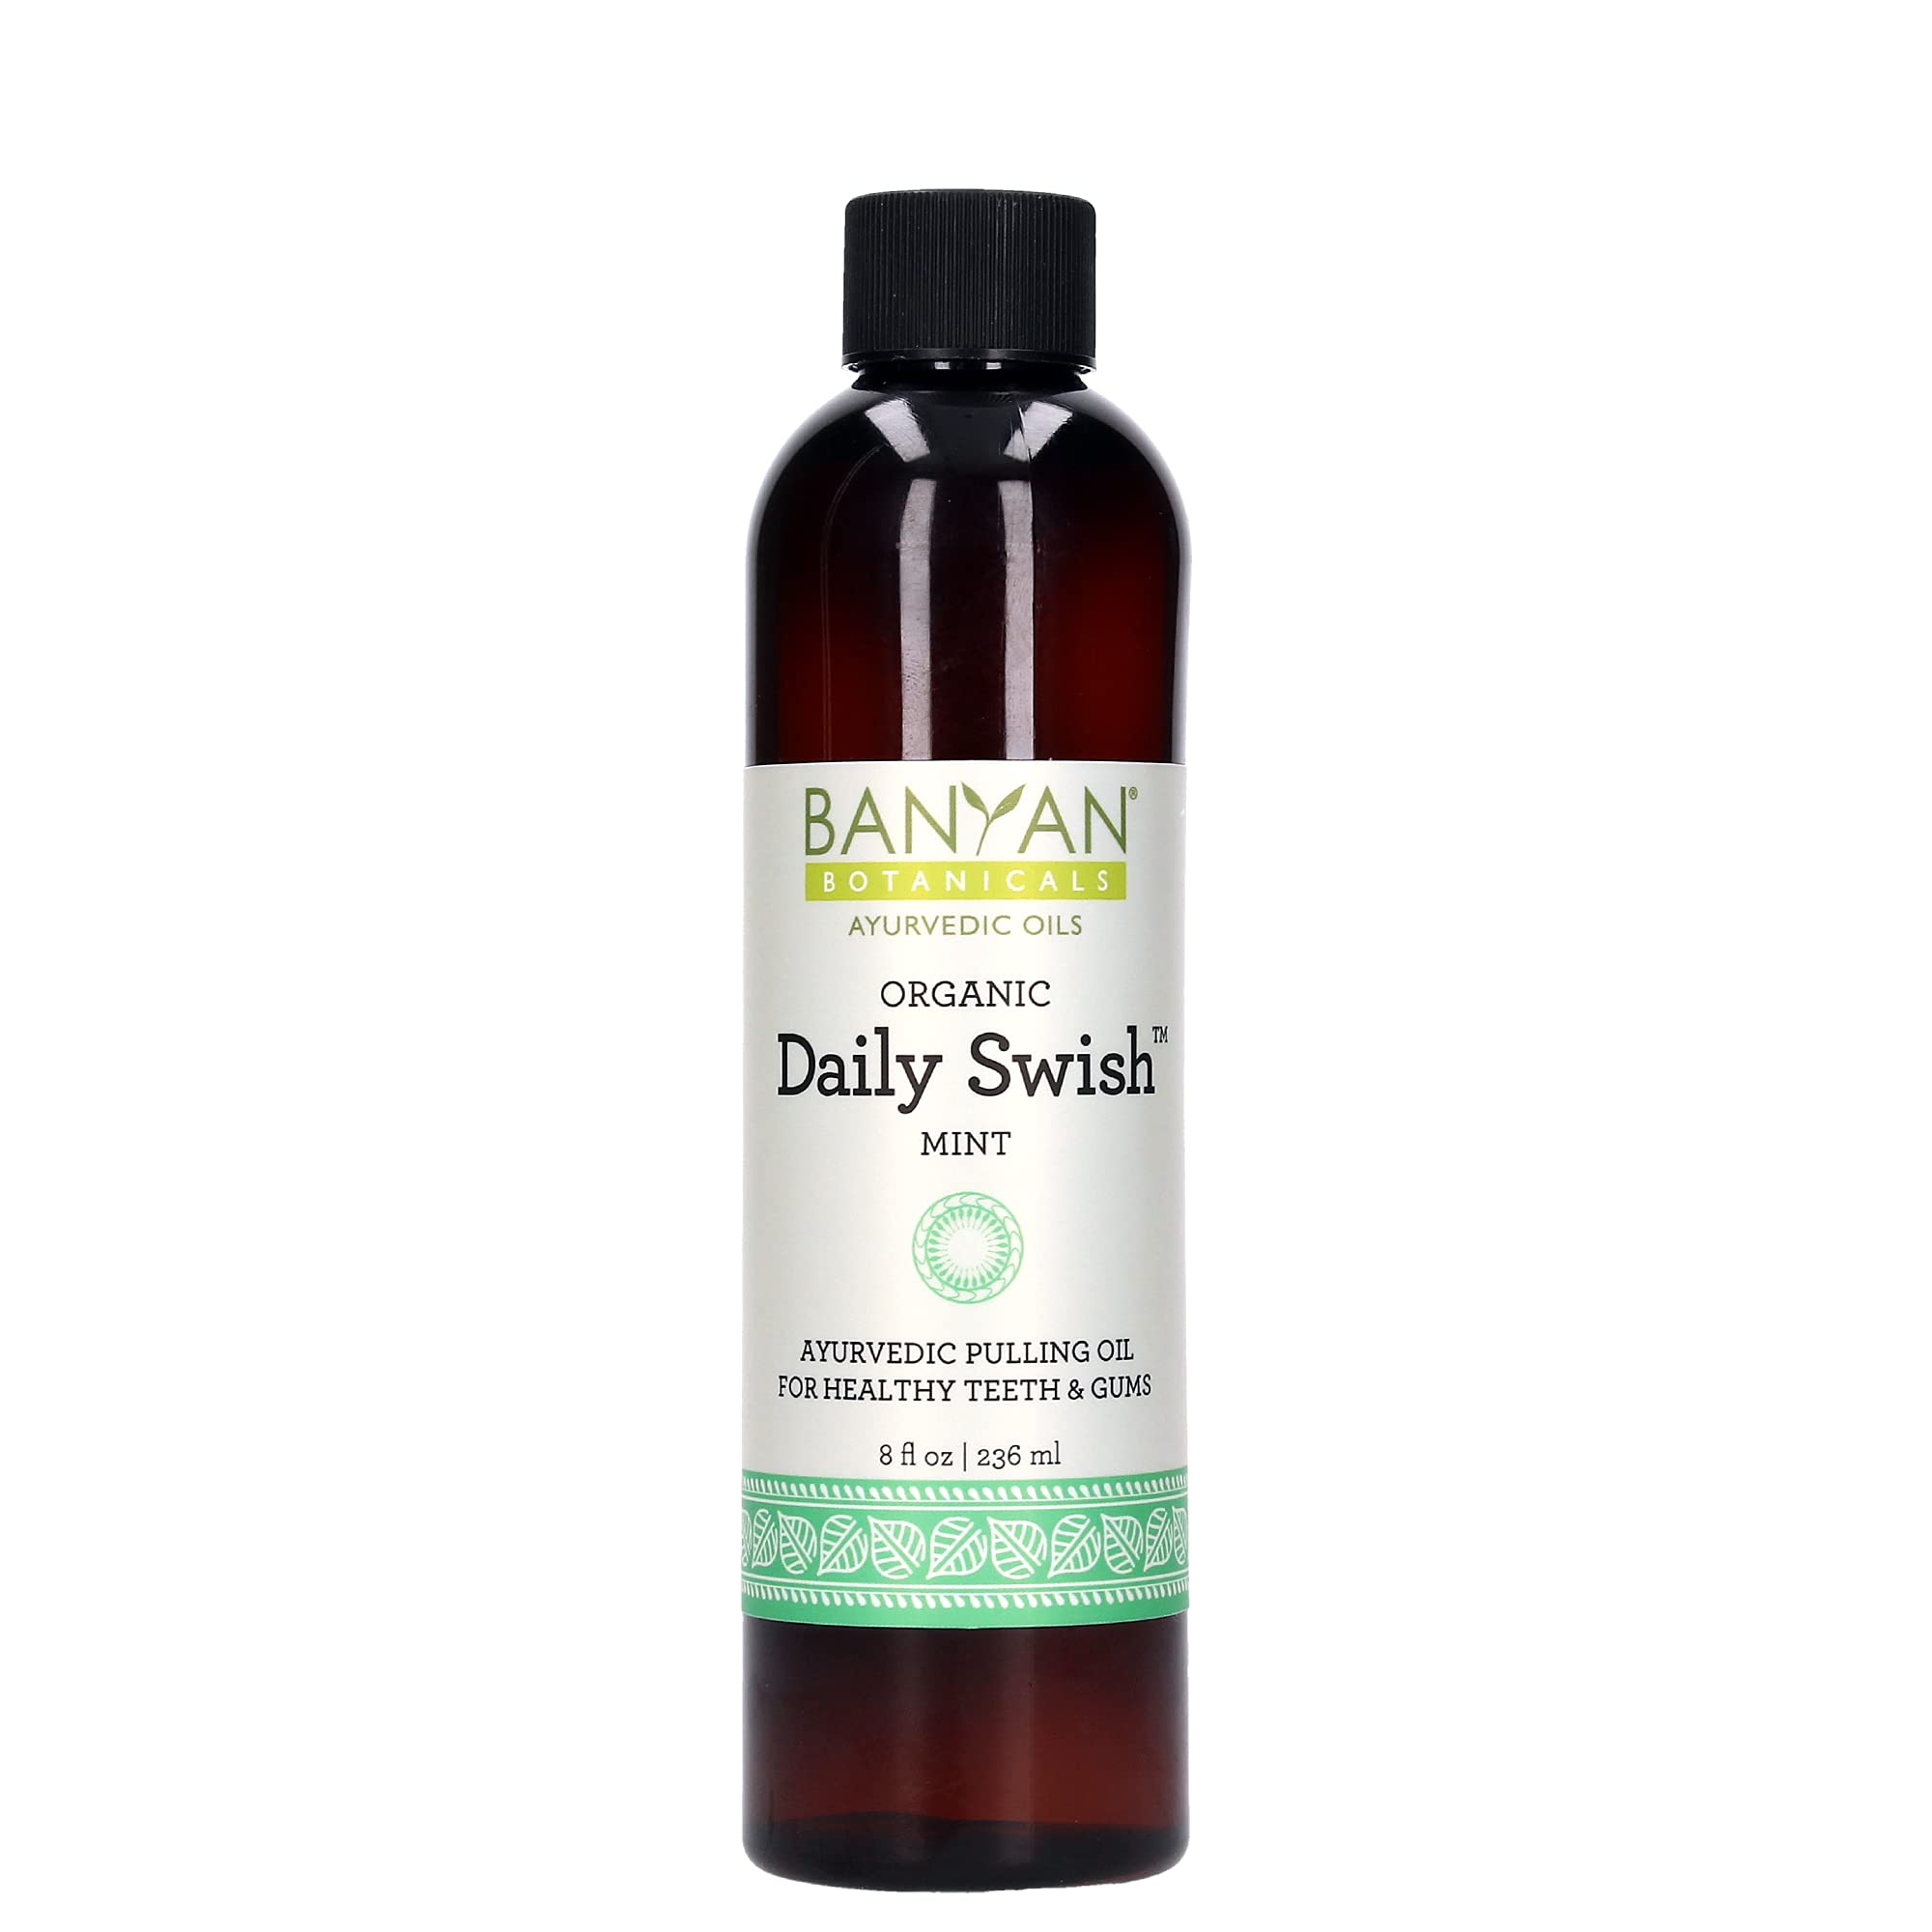 Book Cover Banyan Botanicals Daily Swish Mint – Organic Ayurvedic Oil Pulling Mouthwash with Coconut Oil – for Oral Health, Teeth, & Gums* – 8oz – Non GMO Sustainably Sourced Vegan Mint 8 Fl Oz (Pack of 1)